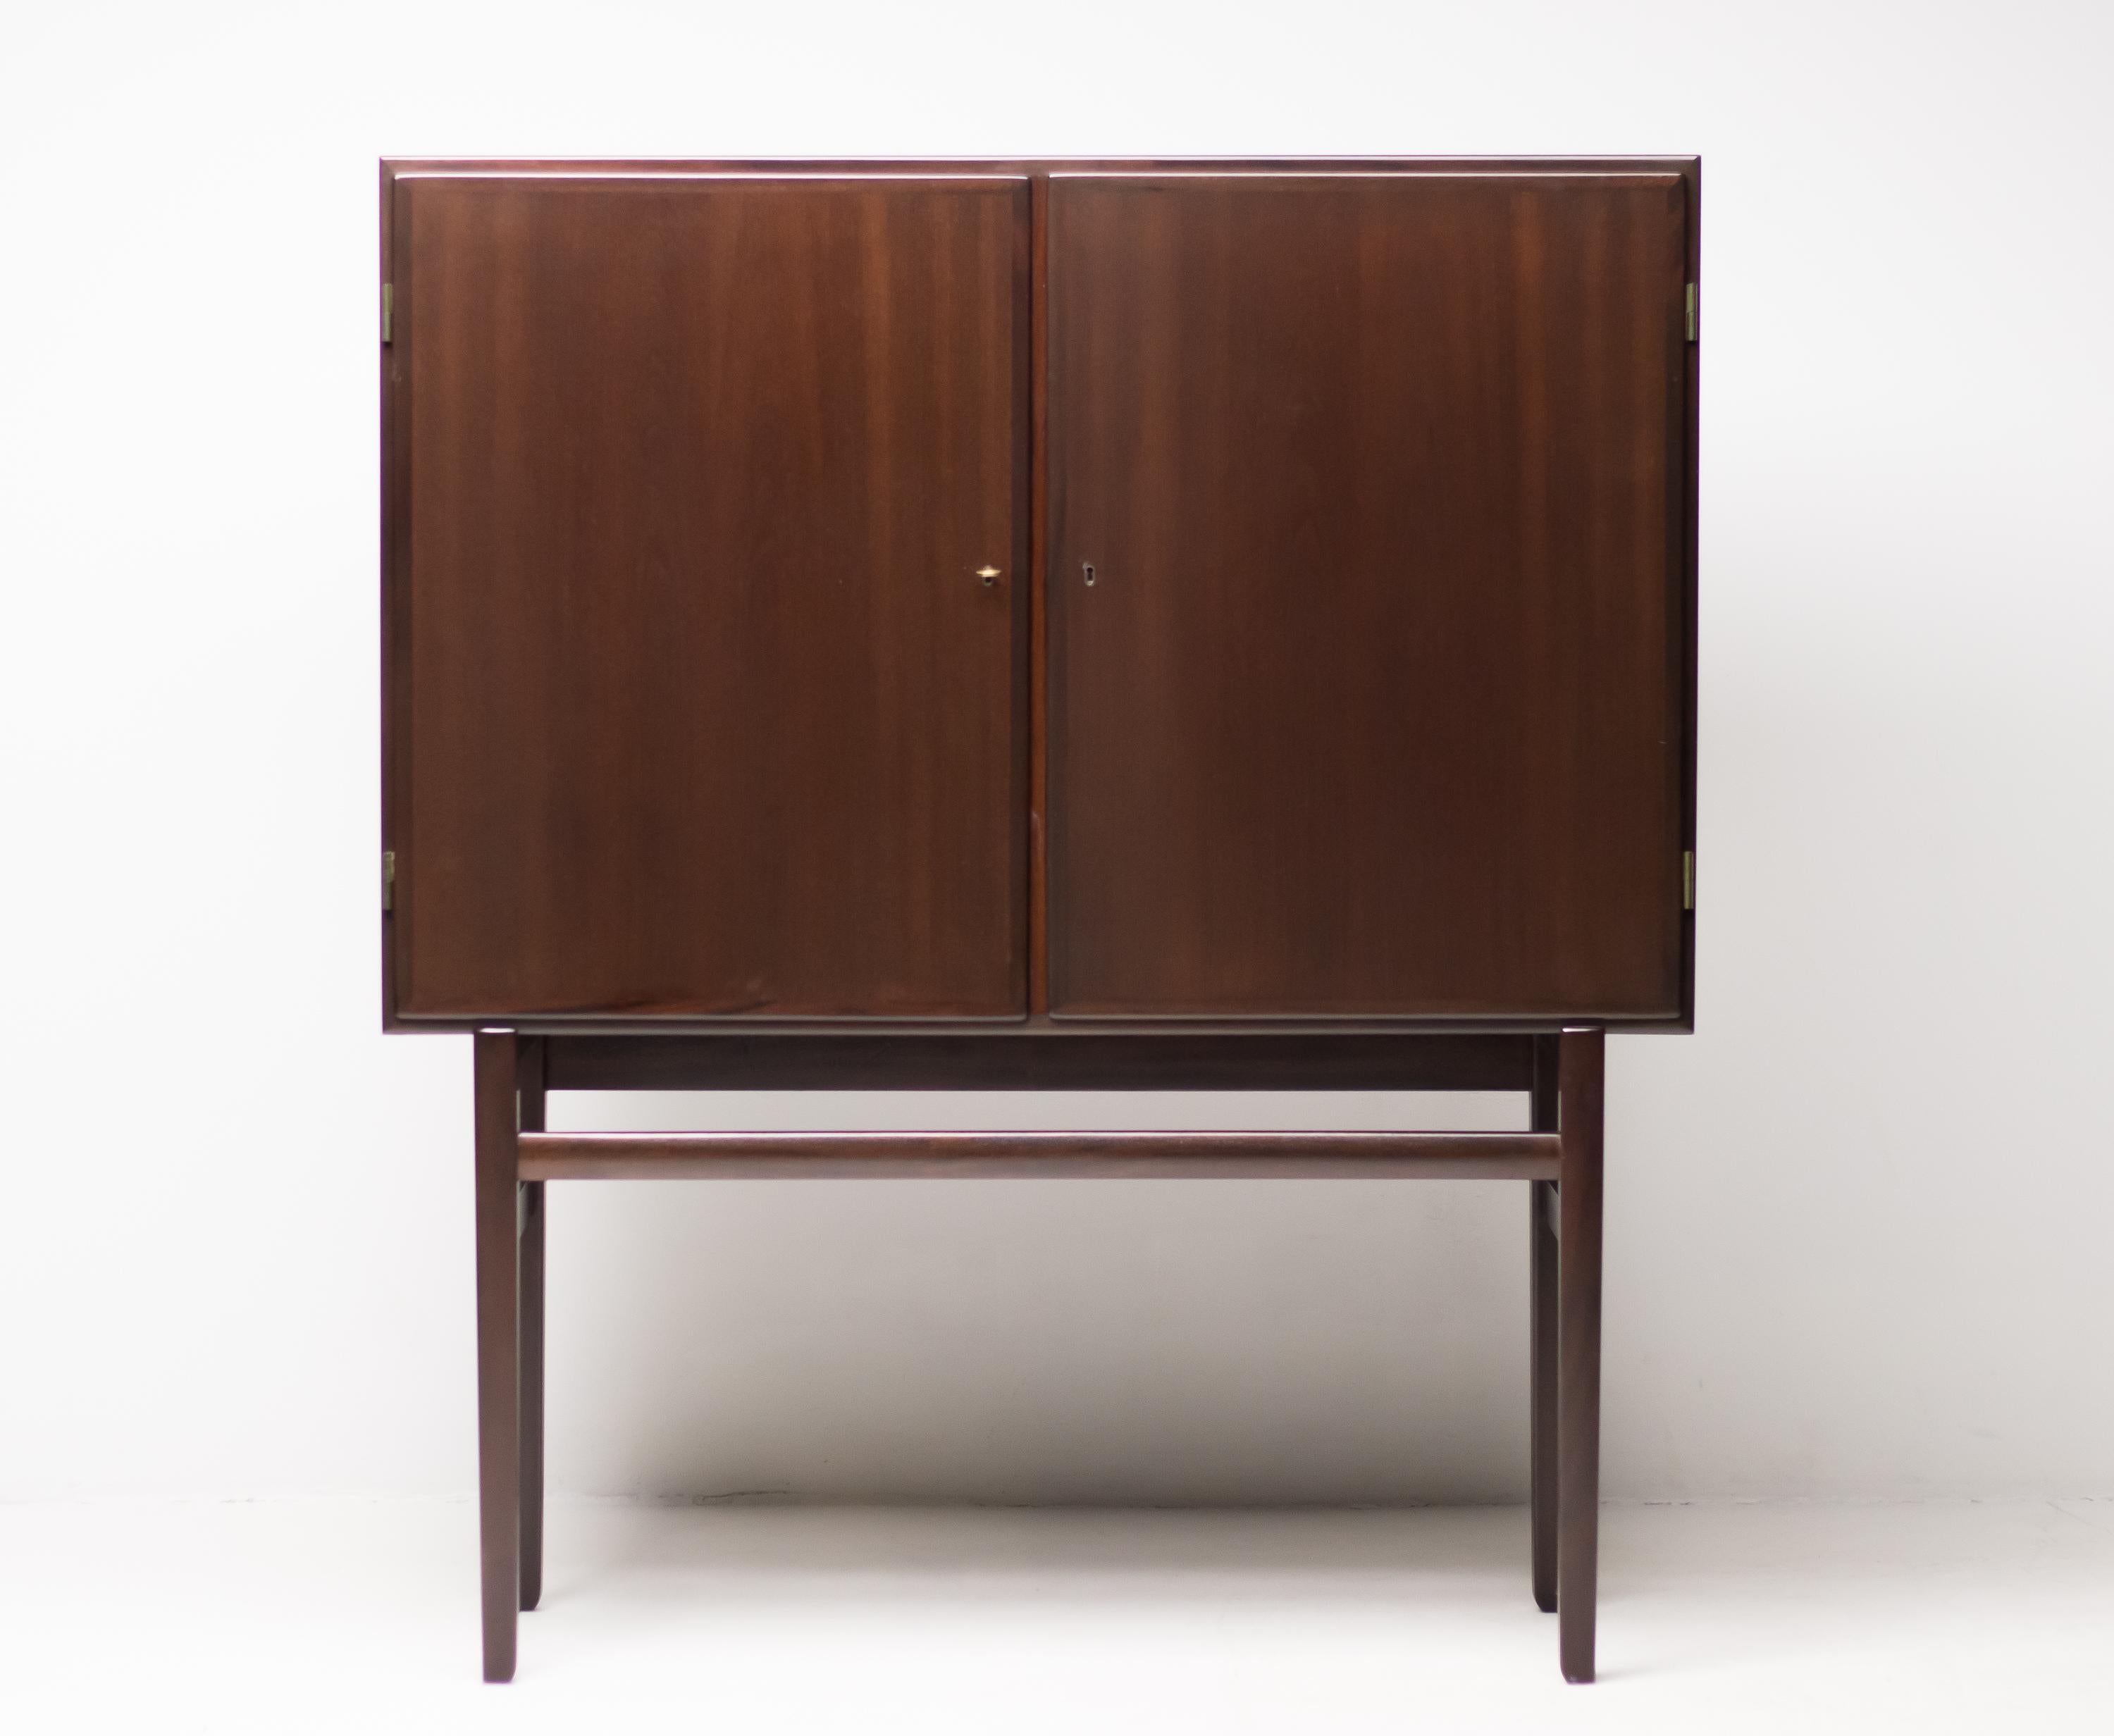 Elegant upright 1950s cabinet in beautifully grained mahogany.
Two doors conceal four interior shelves and one drawer over four legs with high stretchers.
Includes the original brass key for the door locks.
Ole Wanscher and Danish Makers tags on